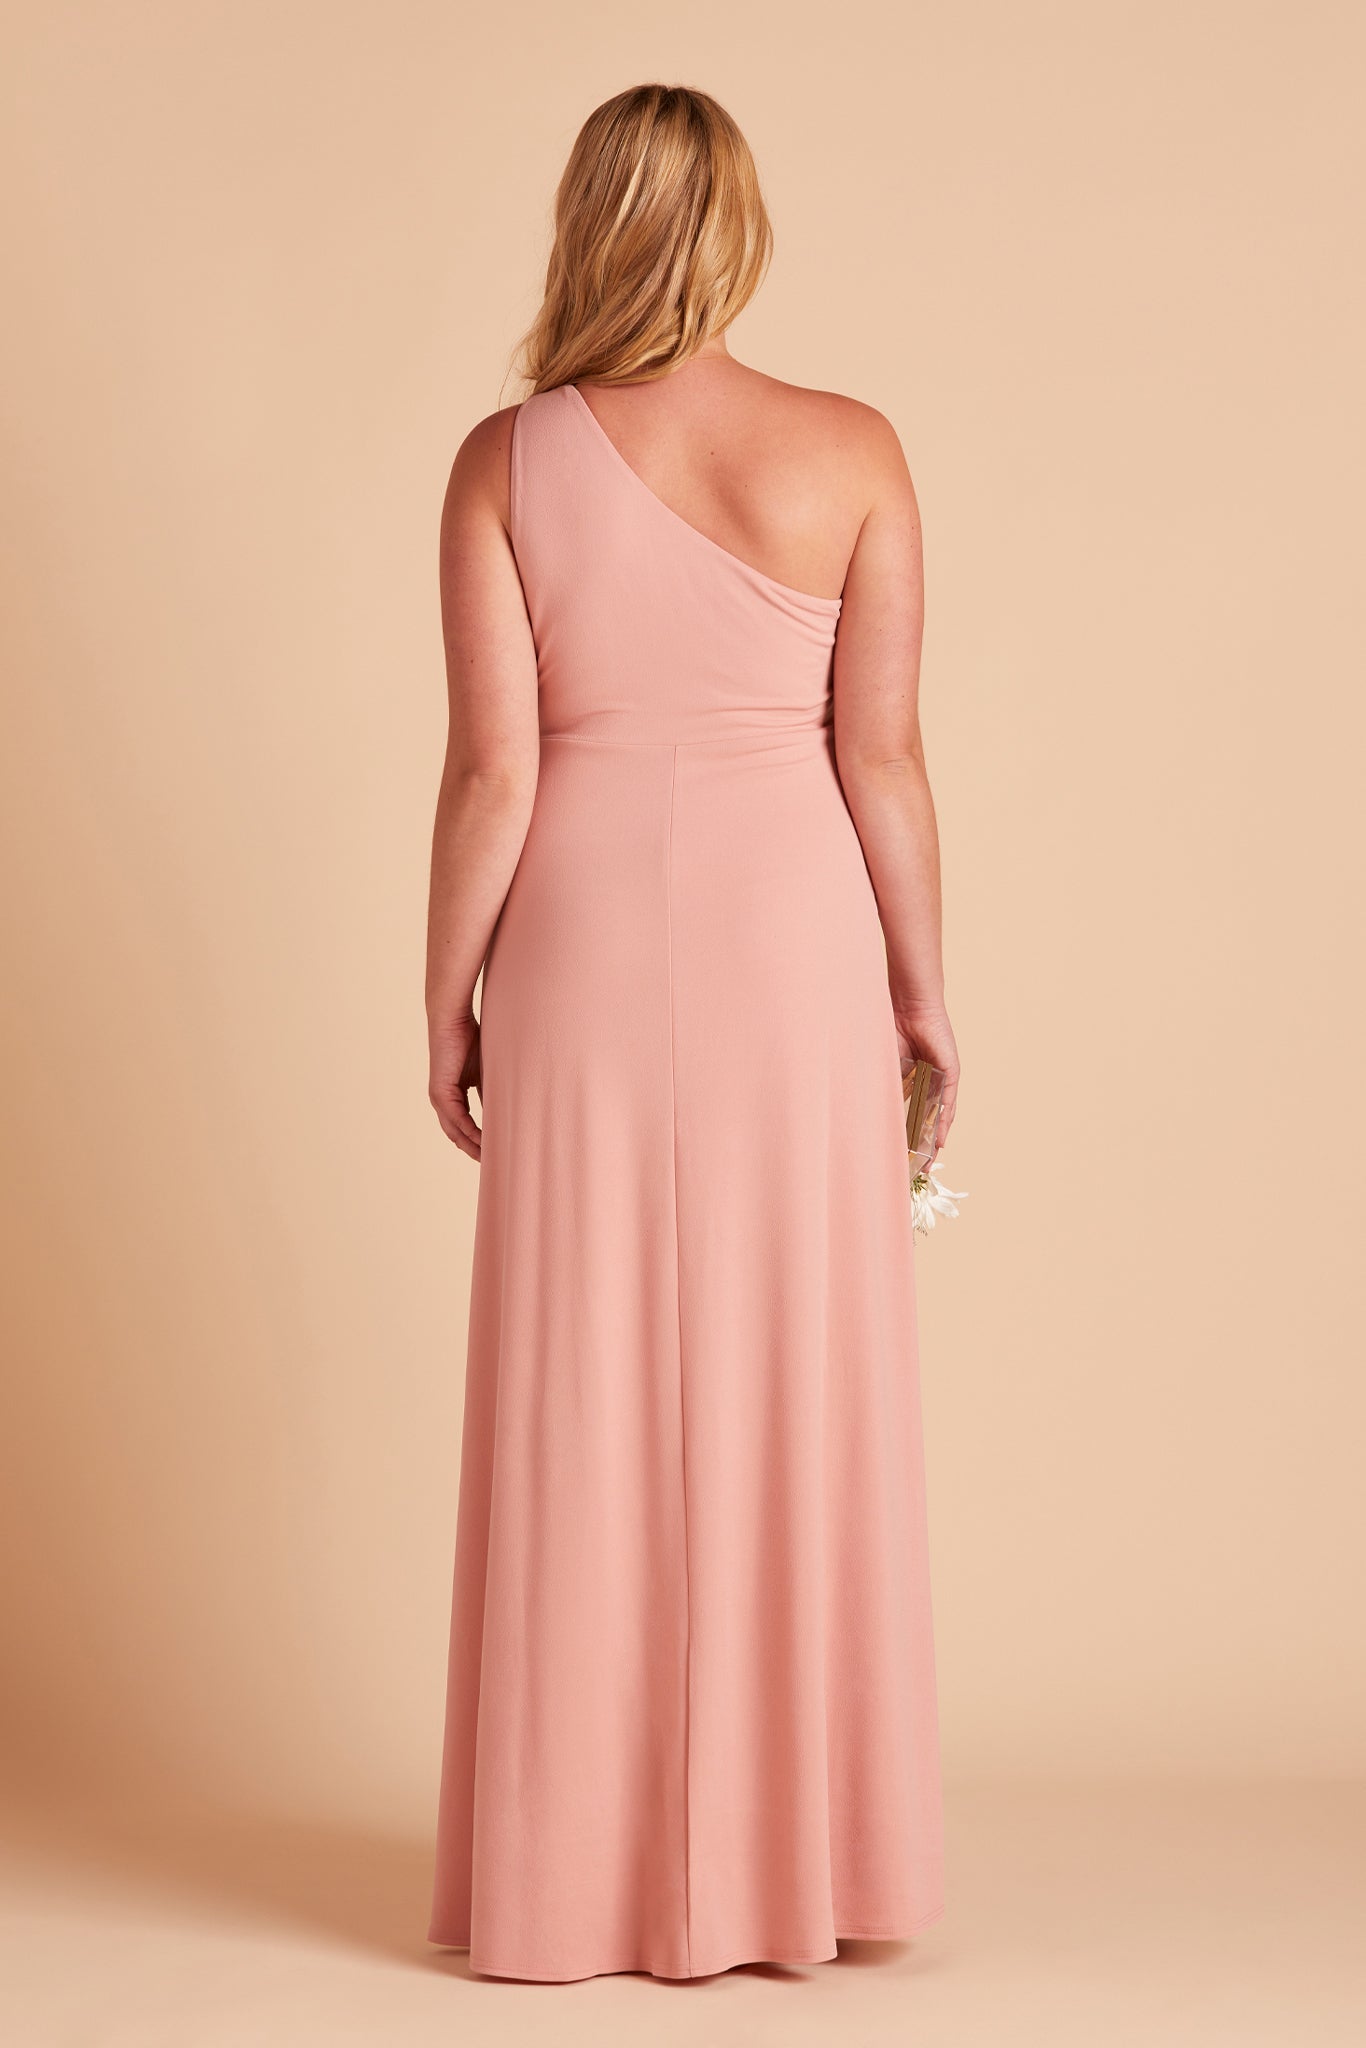 Kira plus size bridesmaid dress with slit in dusty rose crepe by Birdy Grey, back view